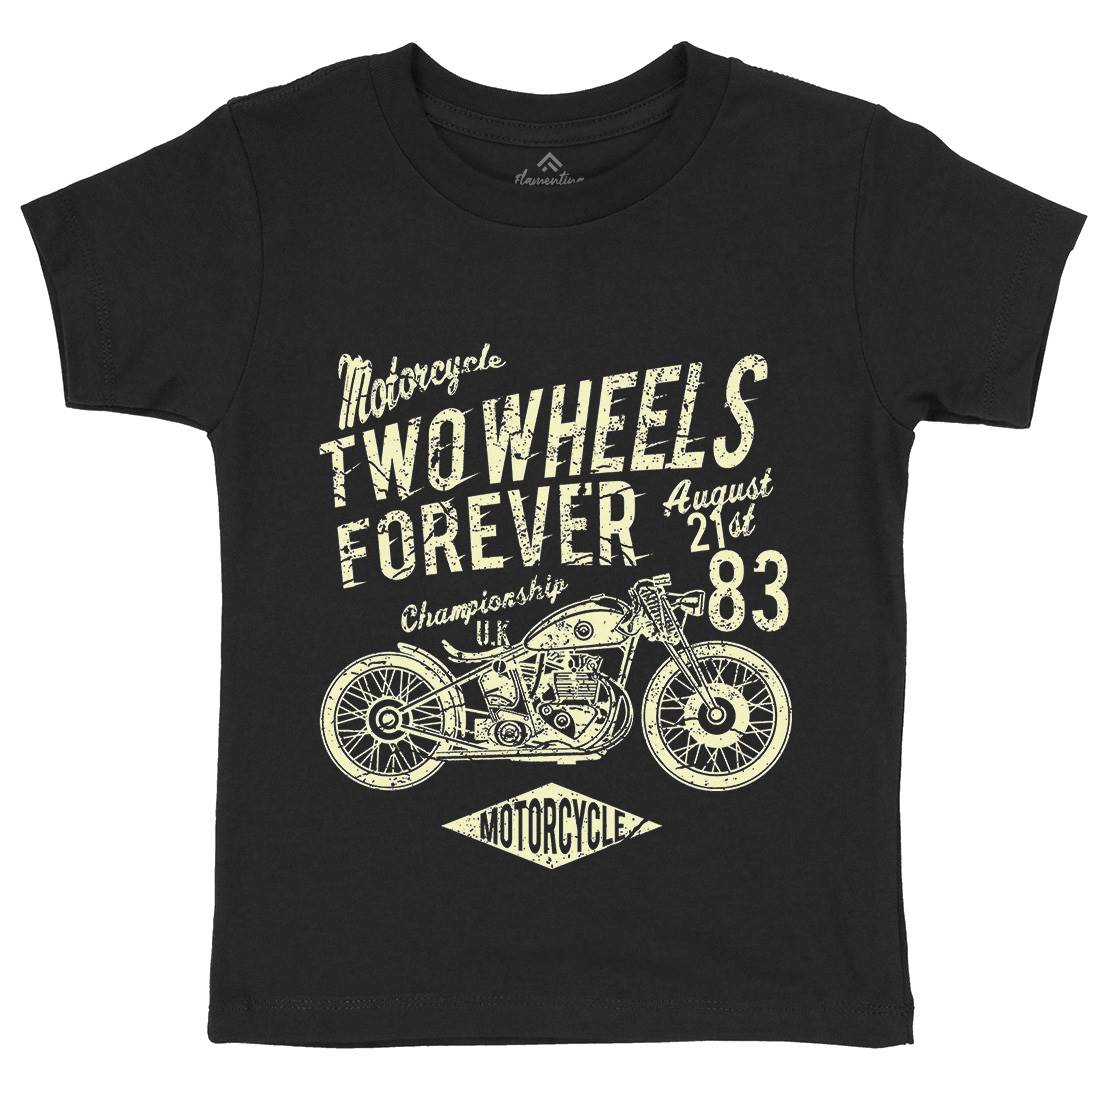 Two Wheels Forever Kids Crew Neck T-Shirt Motorcycles A186